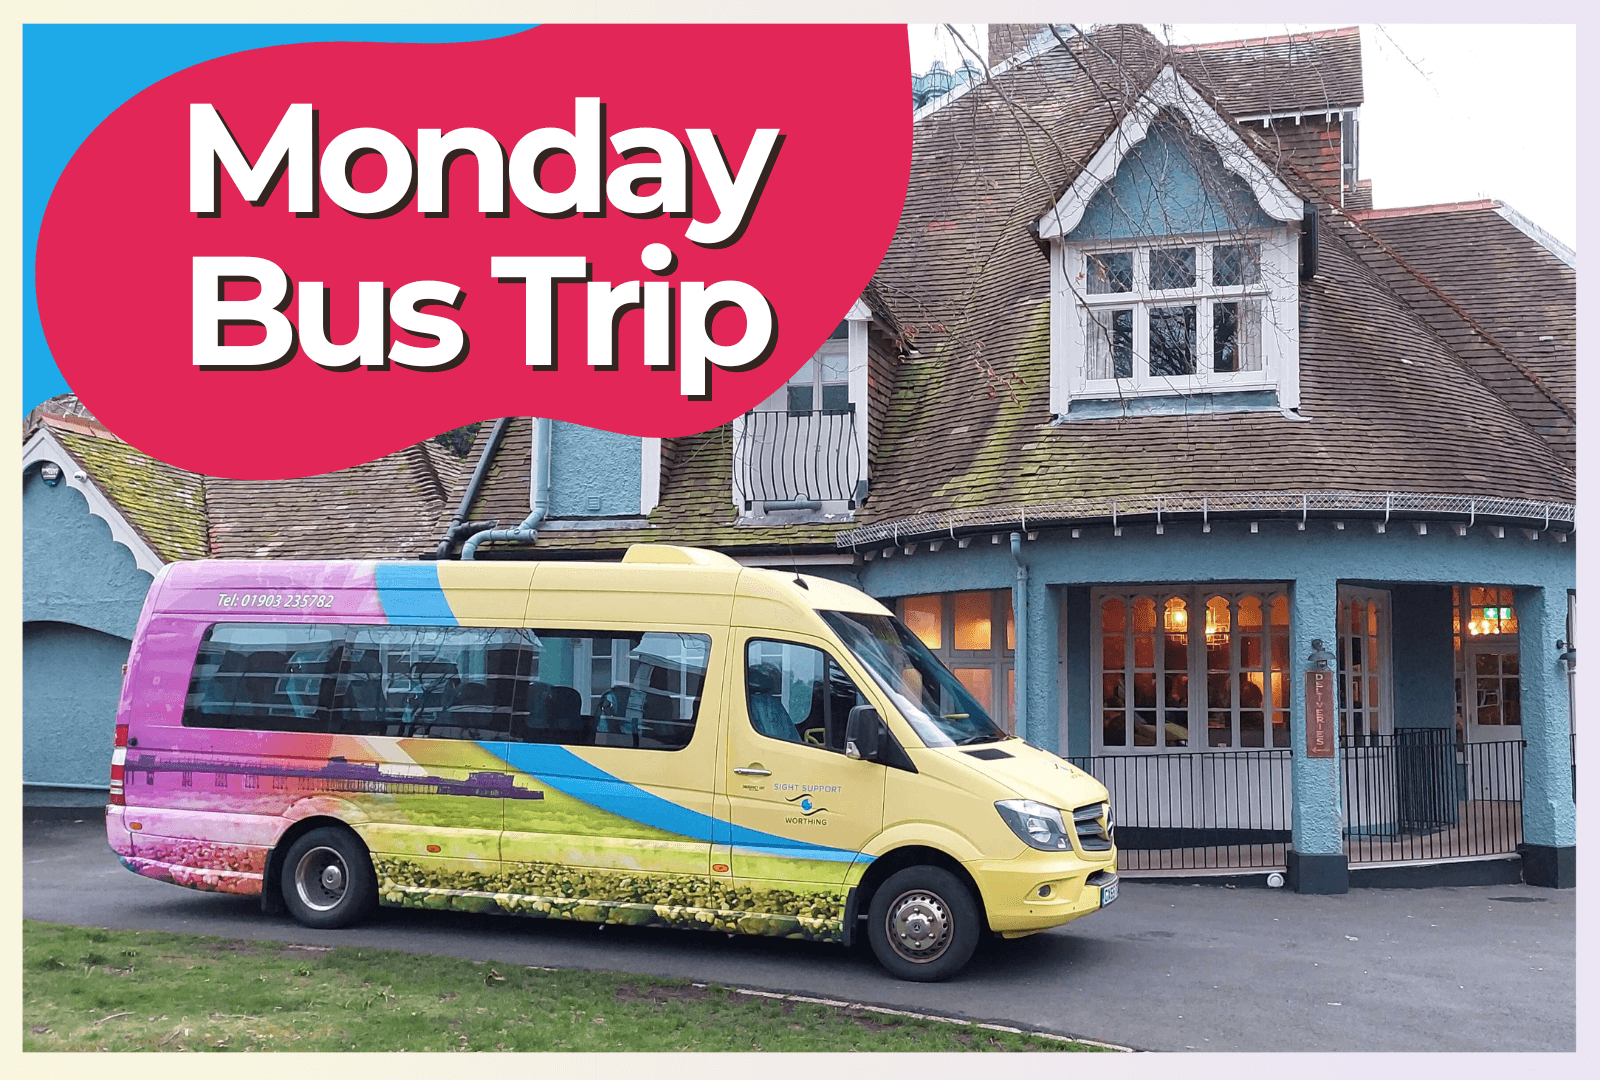 A picture of SSW's Minibus outside a pub with the text 'Monday Bus Trip' in the top left.